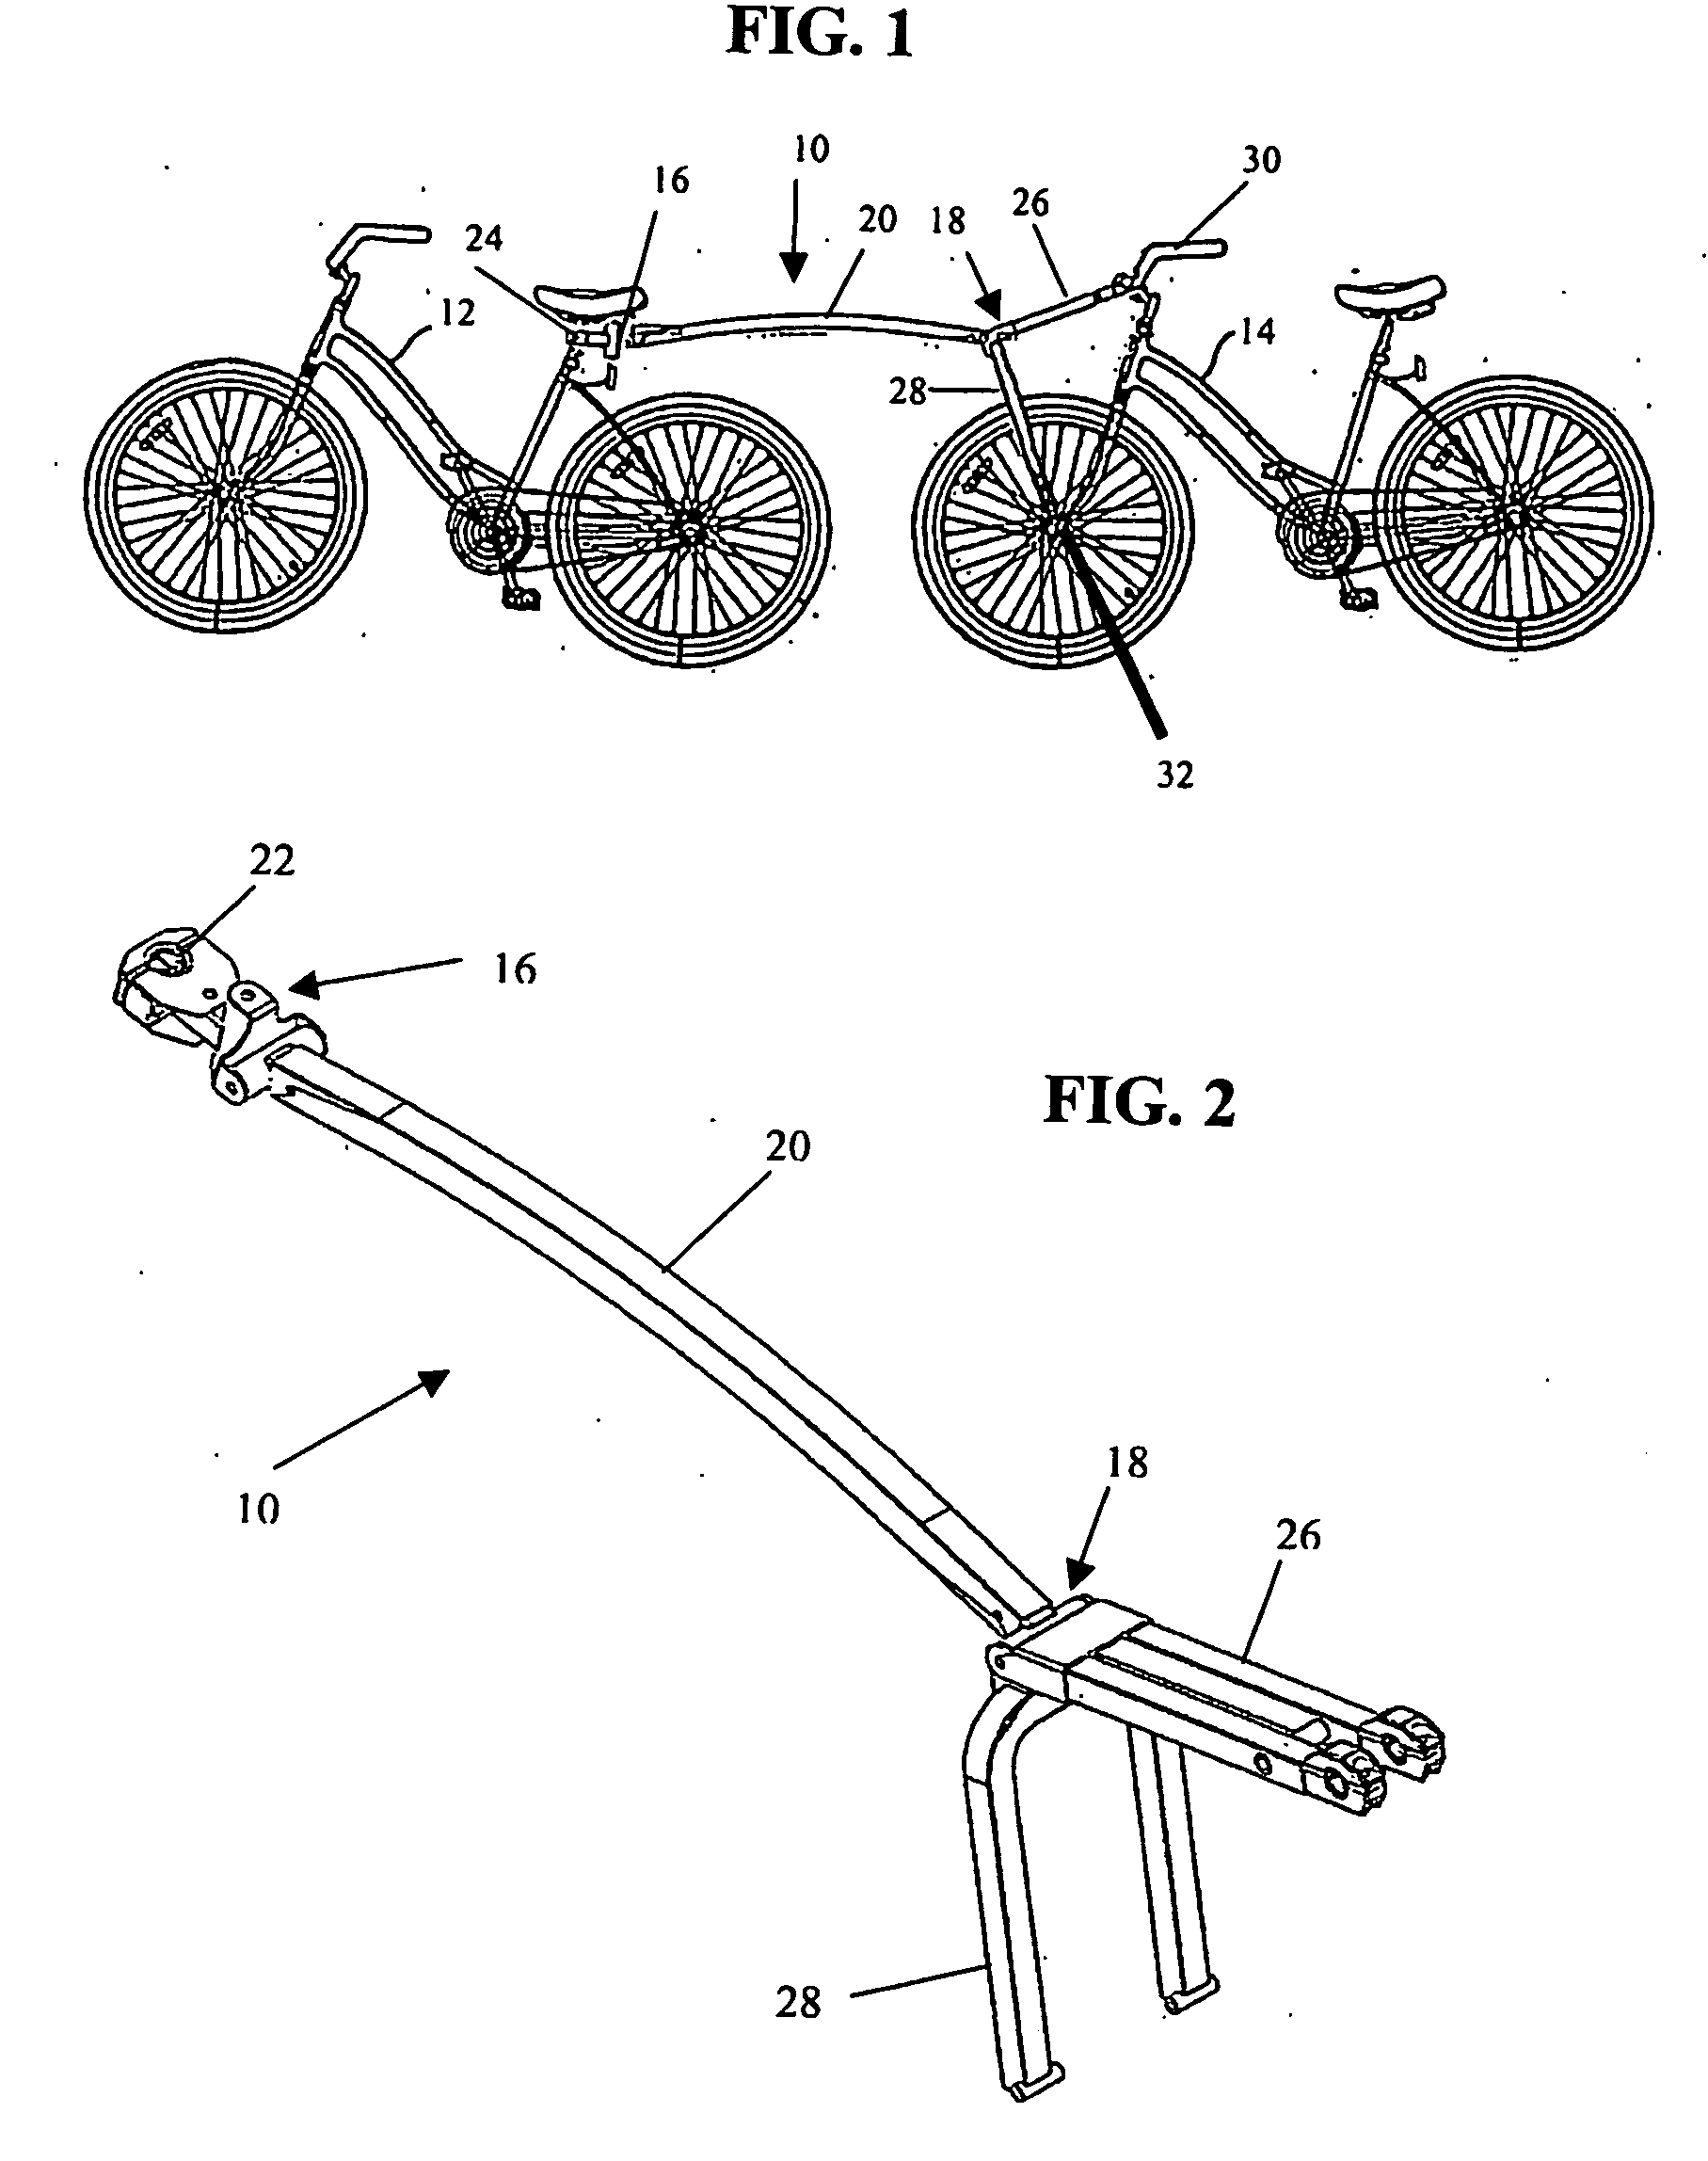 Bicycle towing device